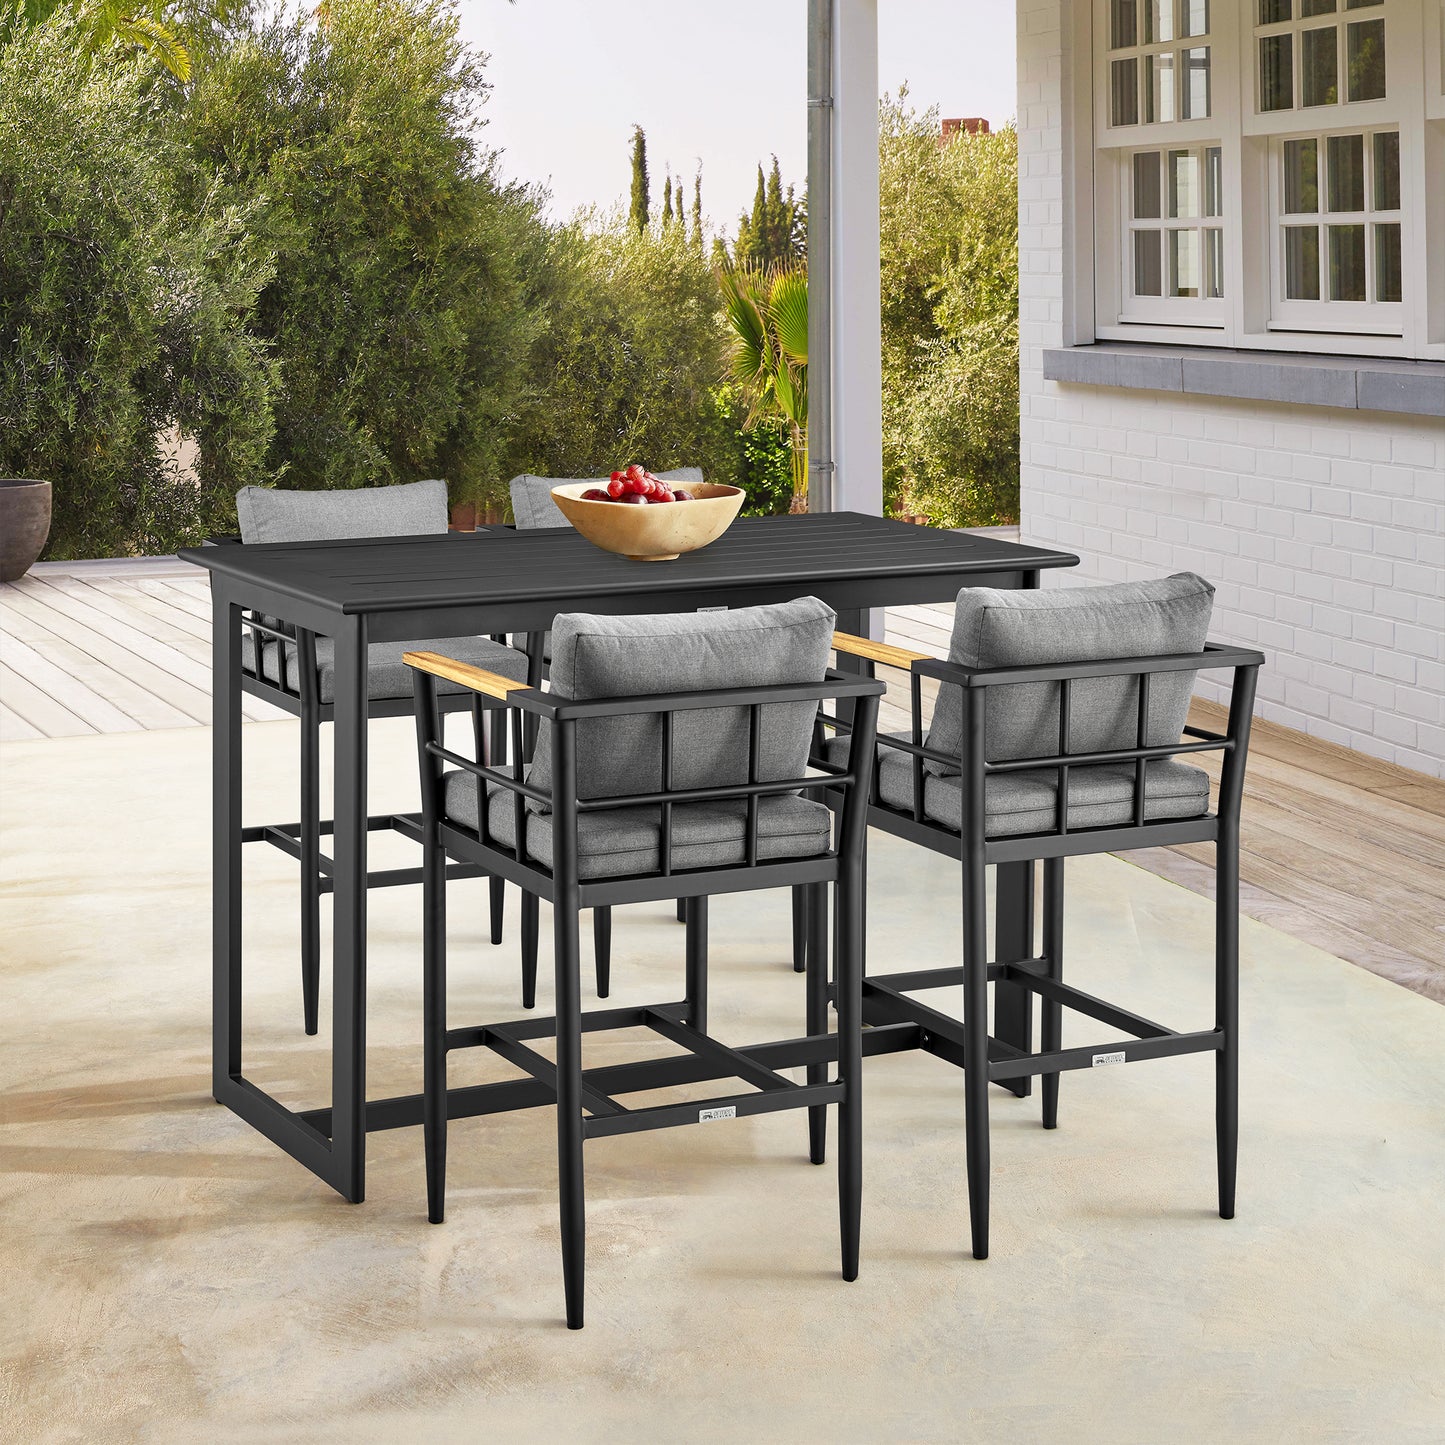 Wiglaf Outdoor Patio 5-Piece Bar Table Set in Aluminum with Gray Cushions